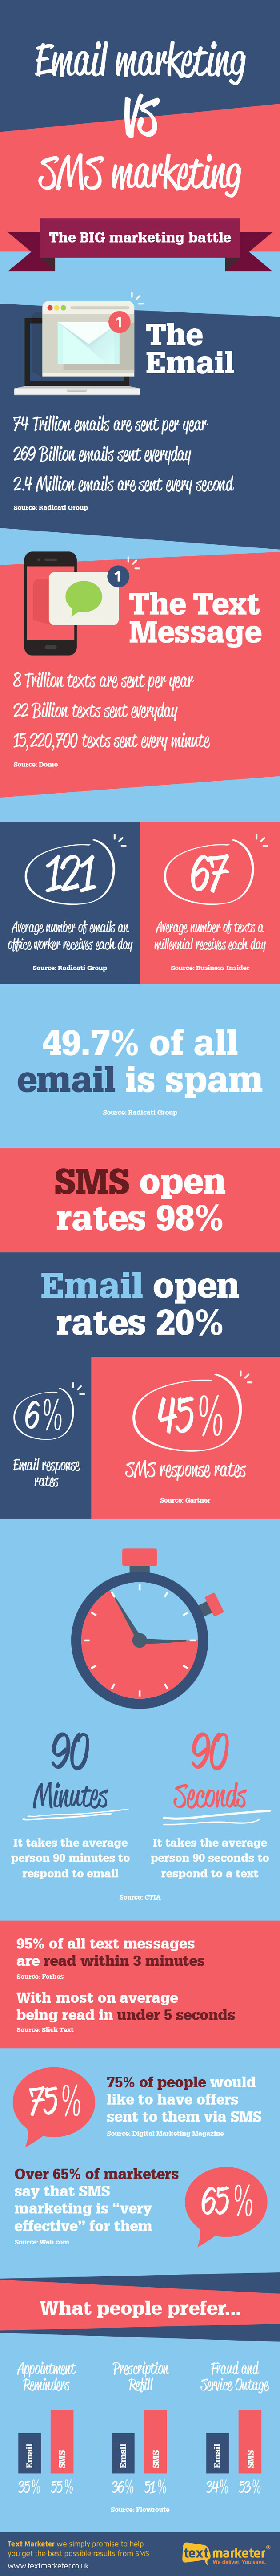 emailing vs sms